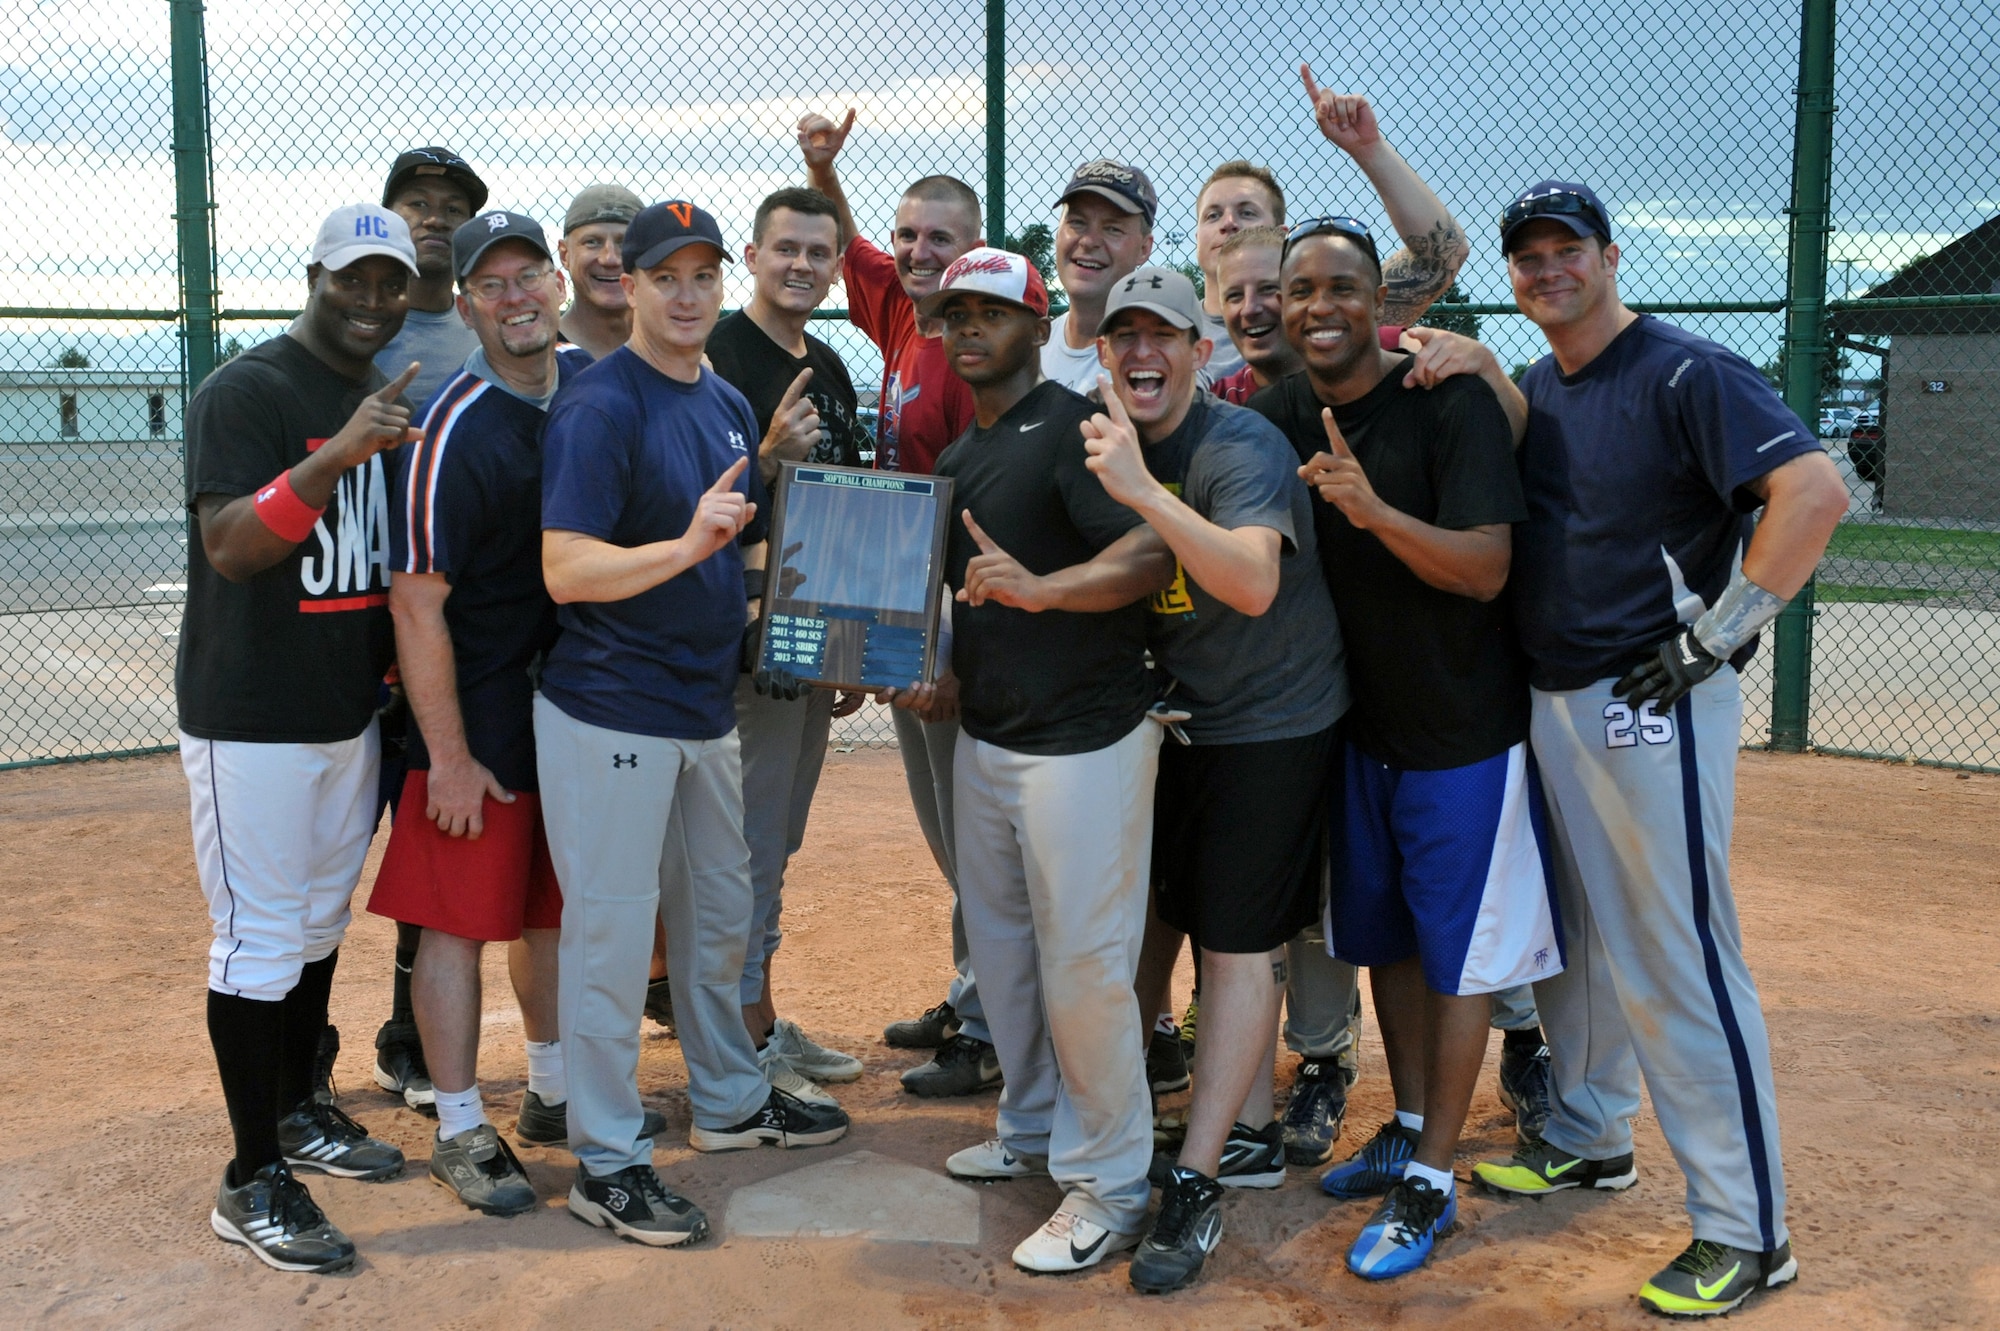 The 460th Space Wing Staff softball team poses for a celebratory photo at home plate after the championship softball game Aug. 20, 2014 at the softball fields on Buckley Air Force Base, Colo. The final score of the game was 24-9, making the wing staff team the 2014 intramural softball base champions. (U.S. Air Force photo by Airman Emily E. Amyotte/Released)